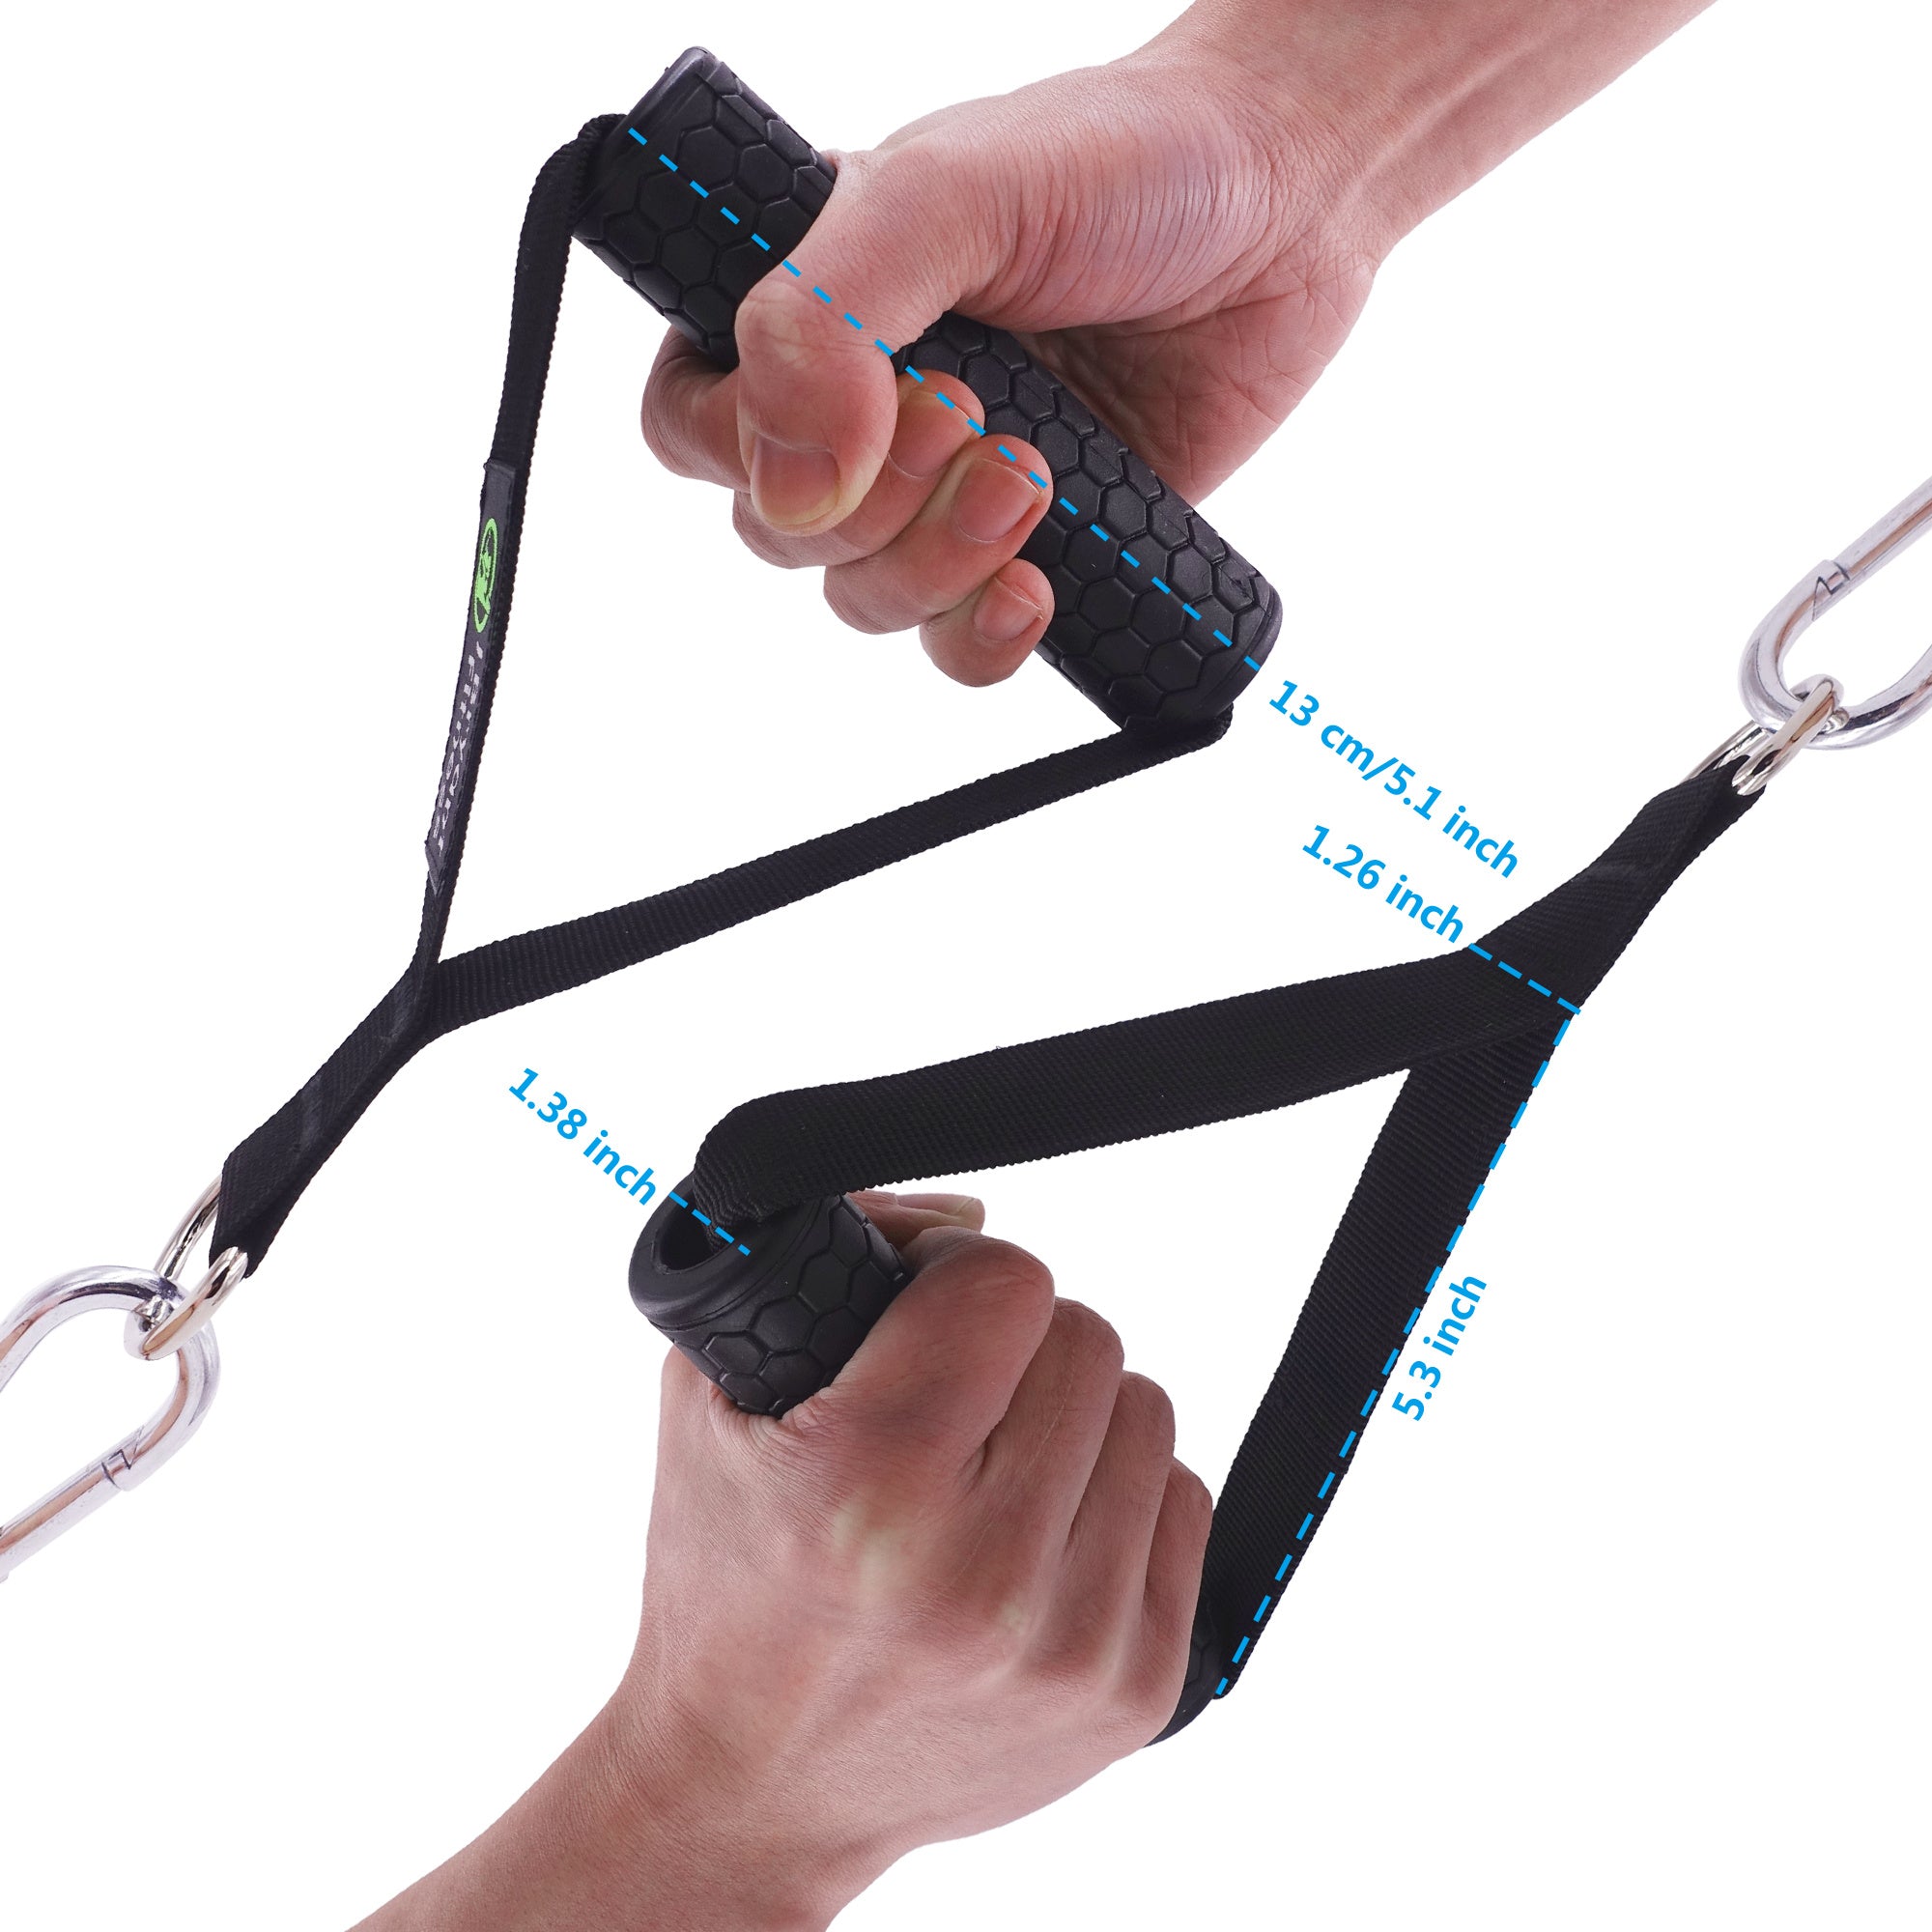 Gym Resistance Bands Handles Anti-slip Grip Strong